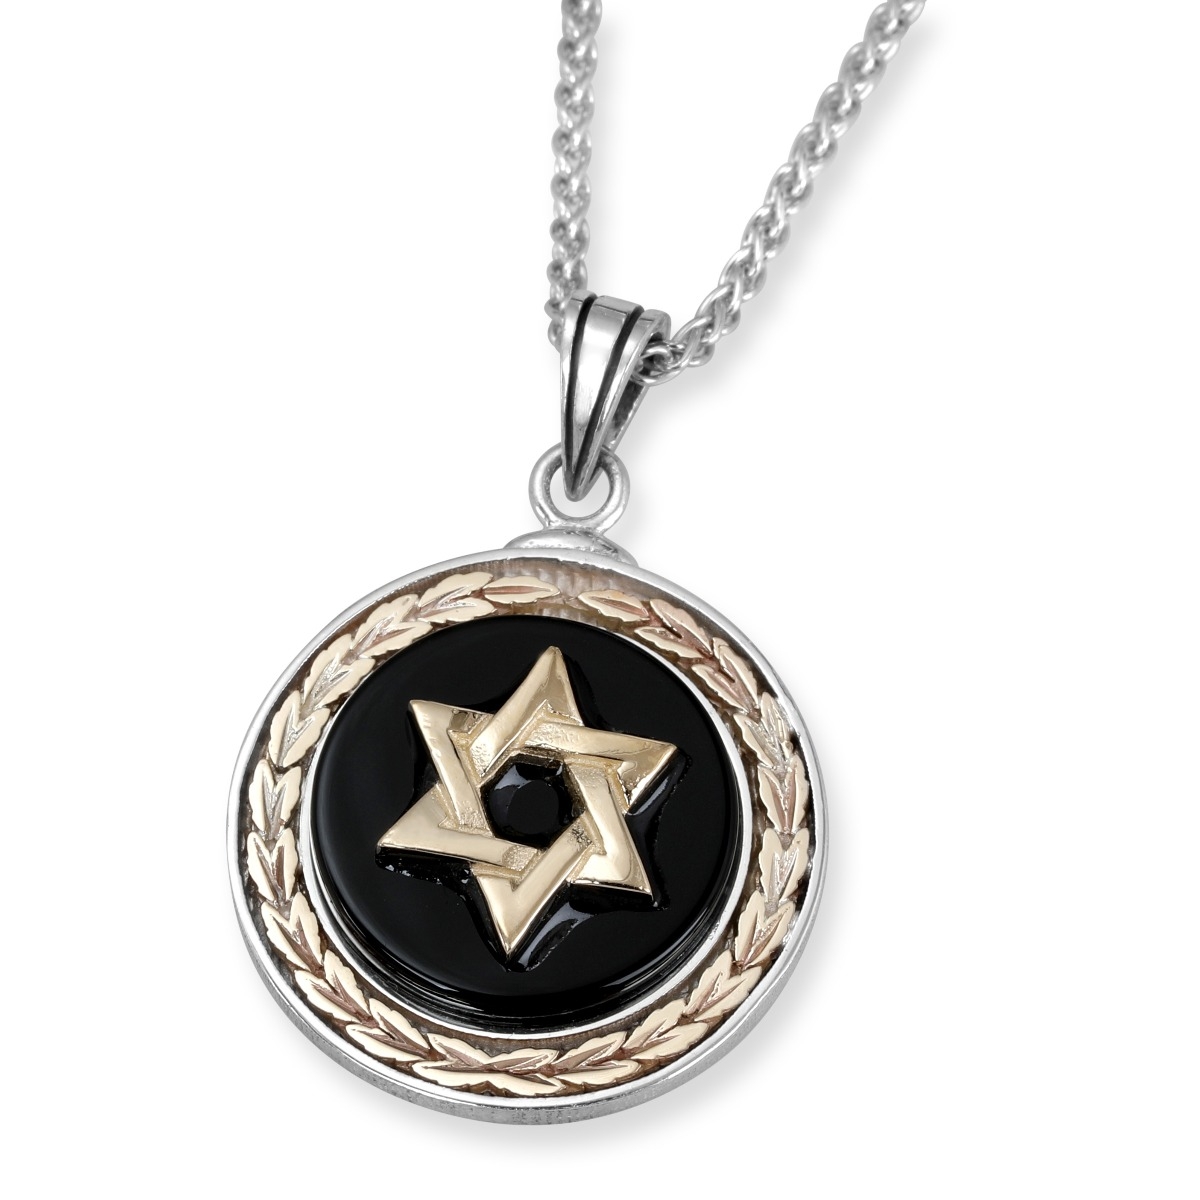 Rafael Jewelry Star of David Sterling Silver and 9K Gold Medallion Necklace - 1